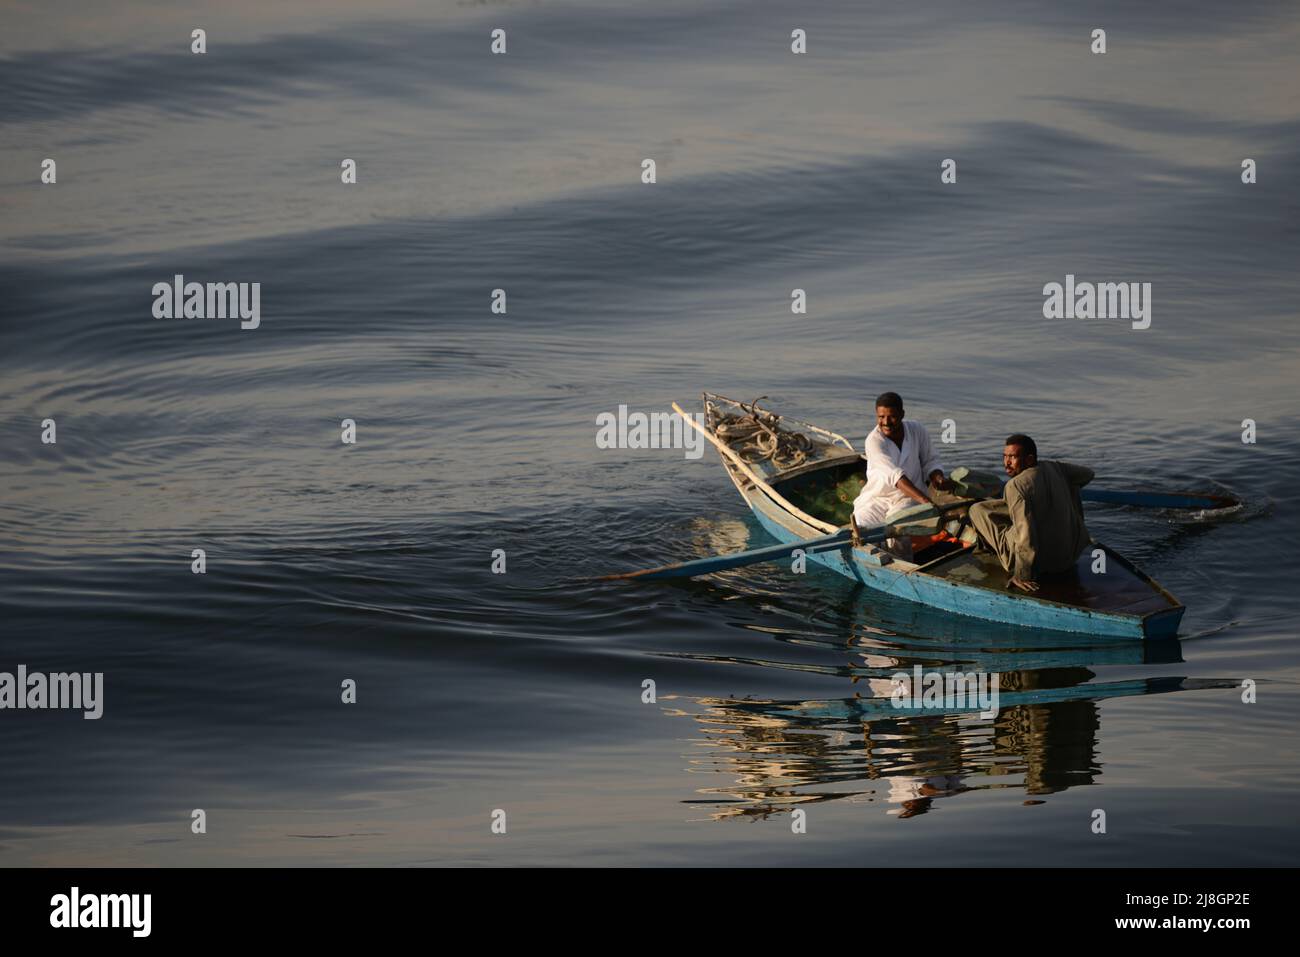 Morning Commute on the Nile. Stock Photo